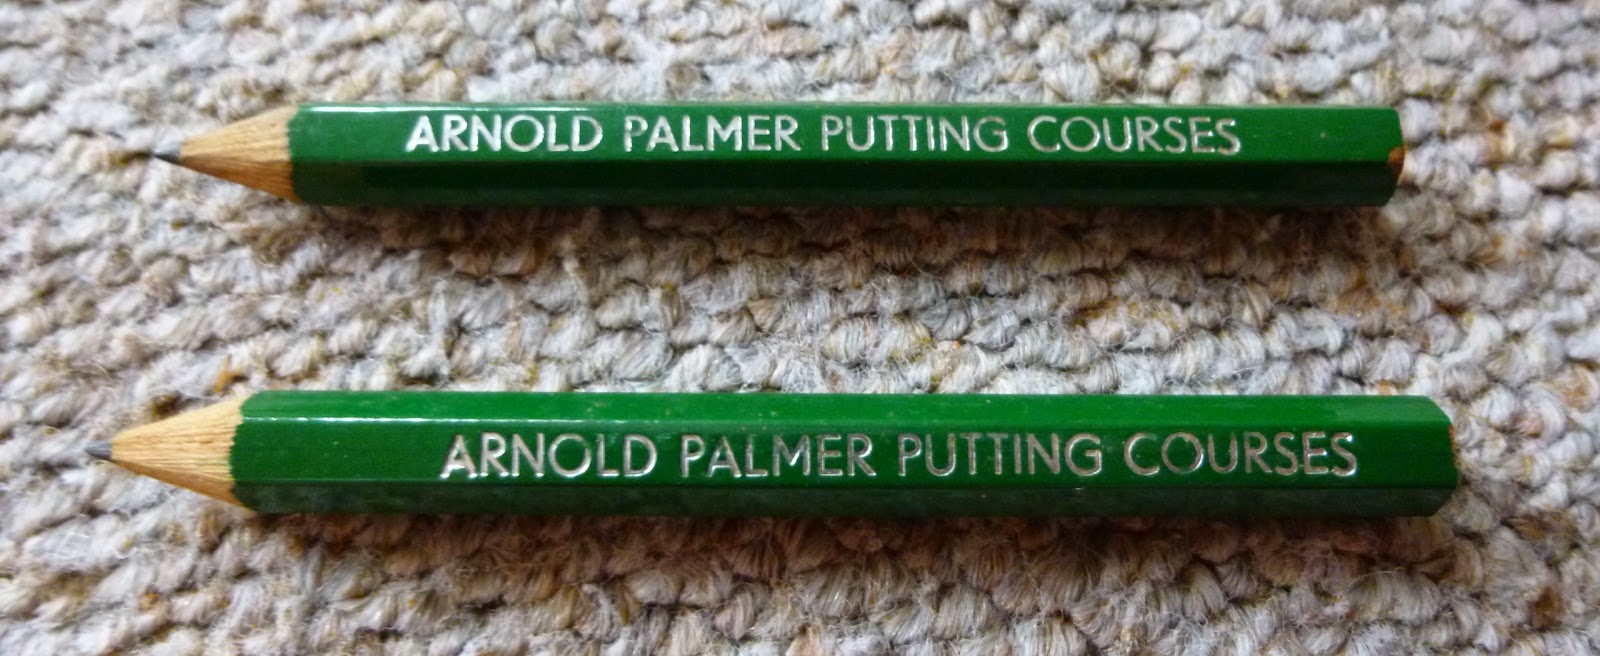 Arnold Palmer Putting Courses Pencils from the Crazy Golf course in Prestatyn, Wales